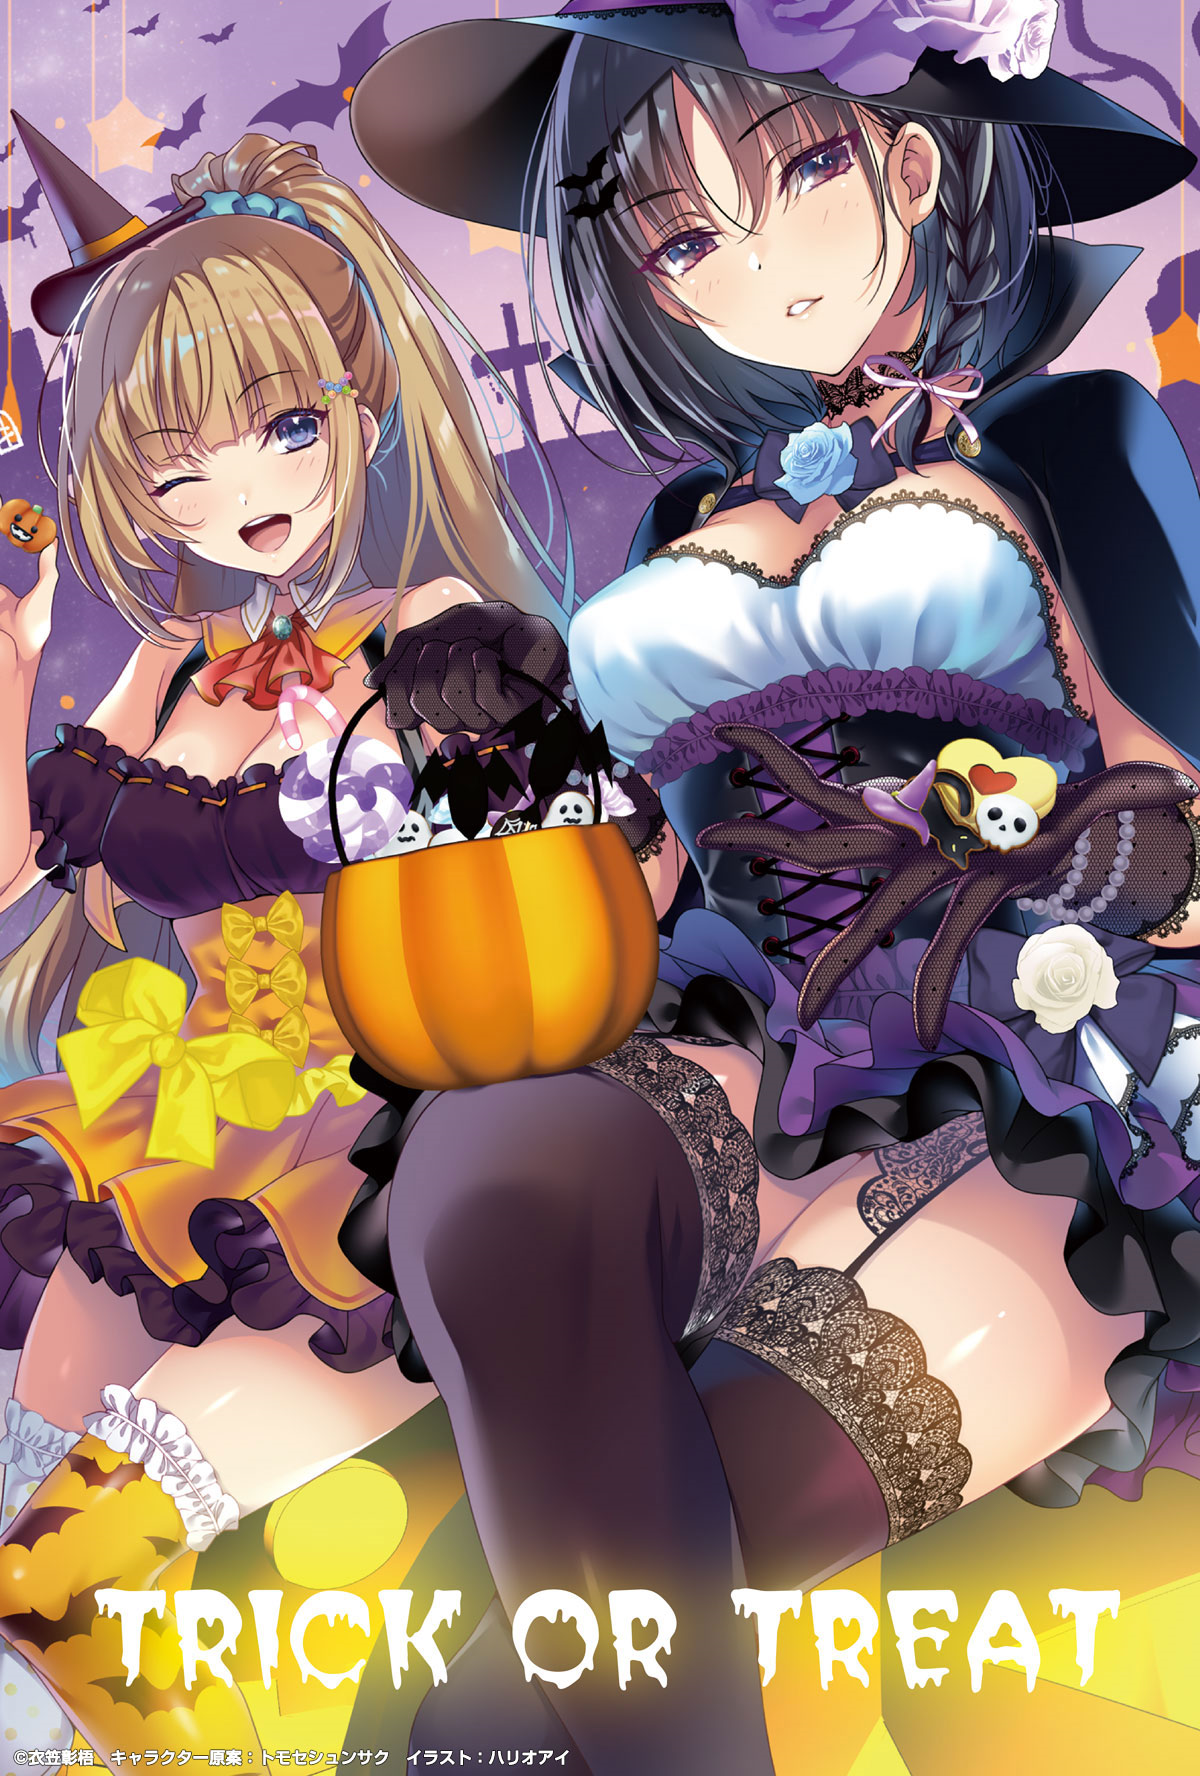 insert image of horikita and karuizawa from classroom of the elite trick or treat halloween poster promotion